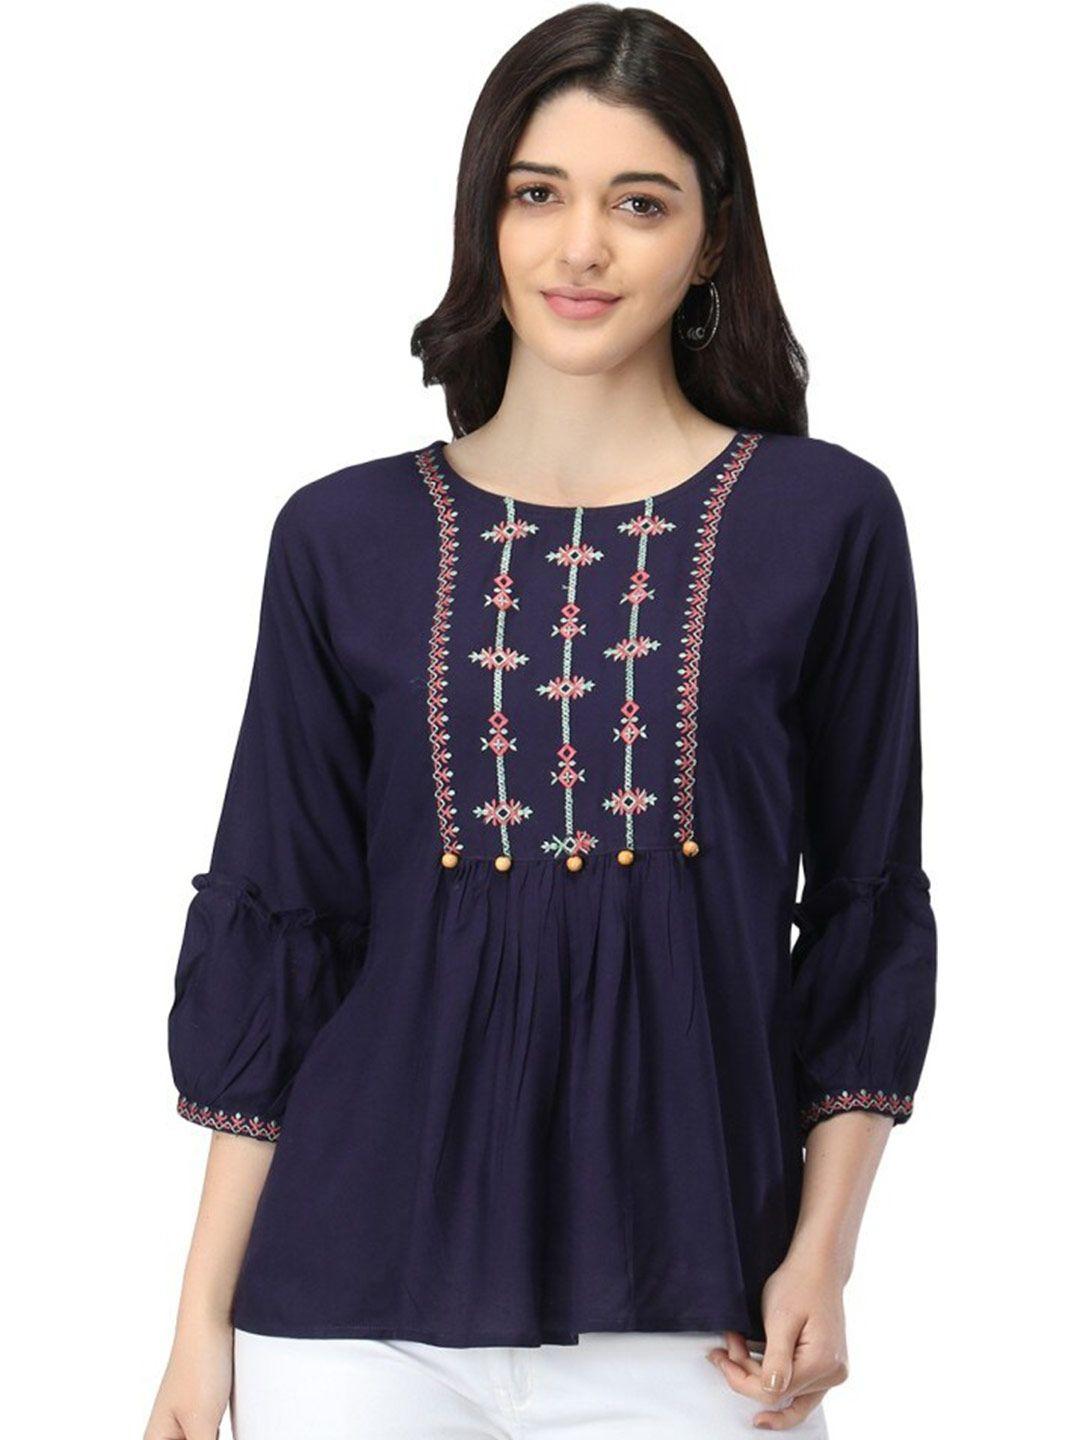 roopwati fashion navy blue floral embroidered empire top